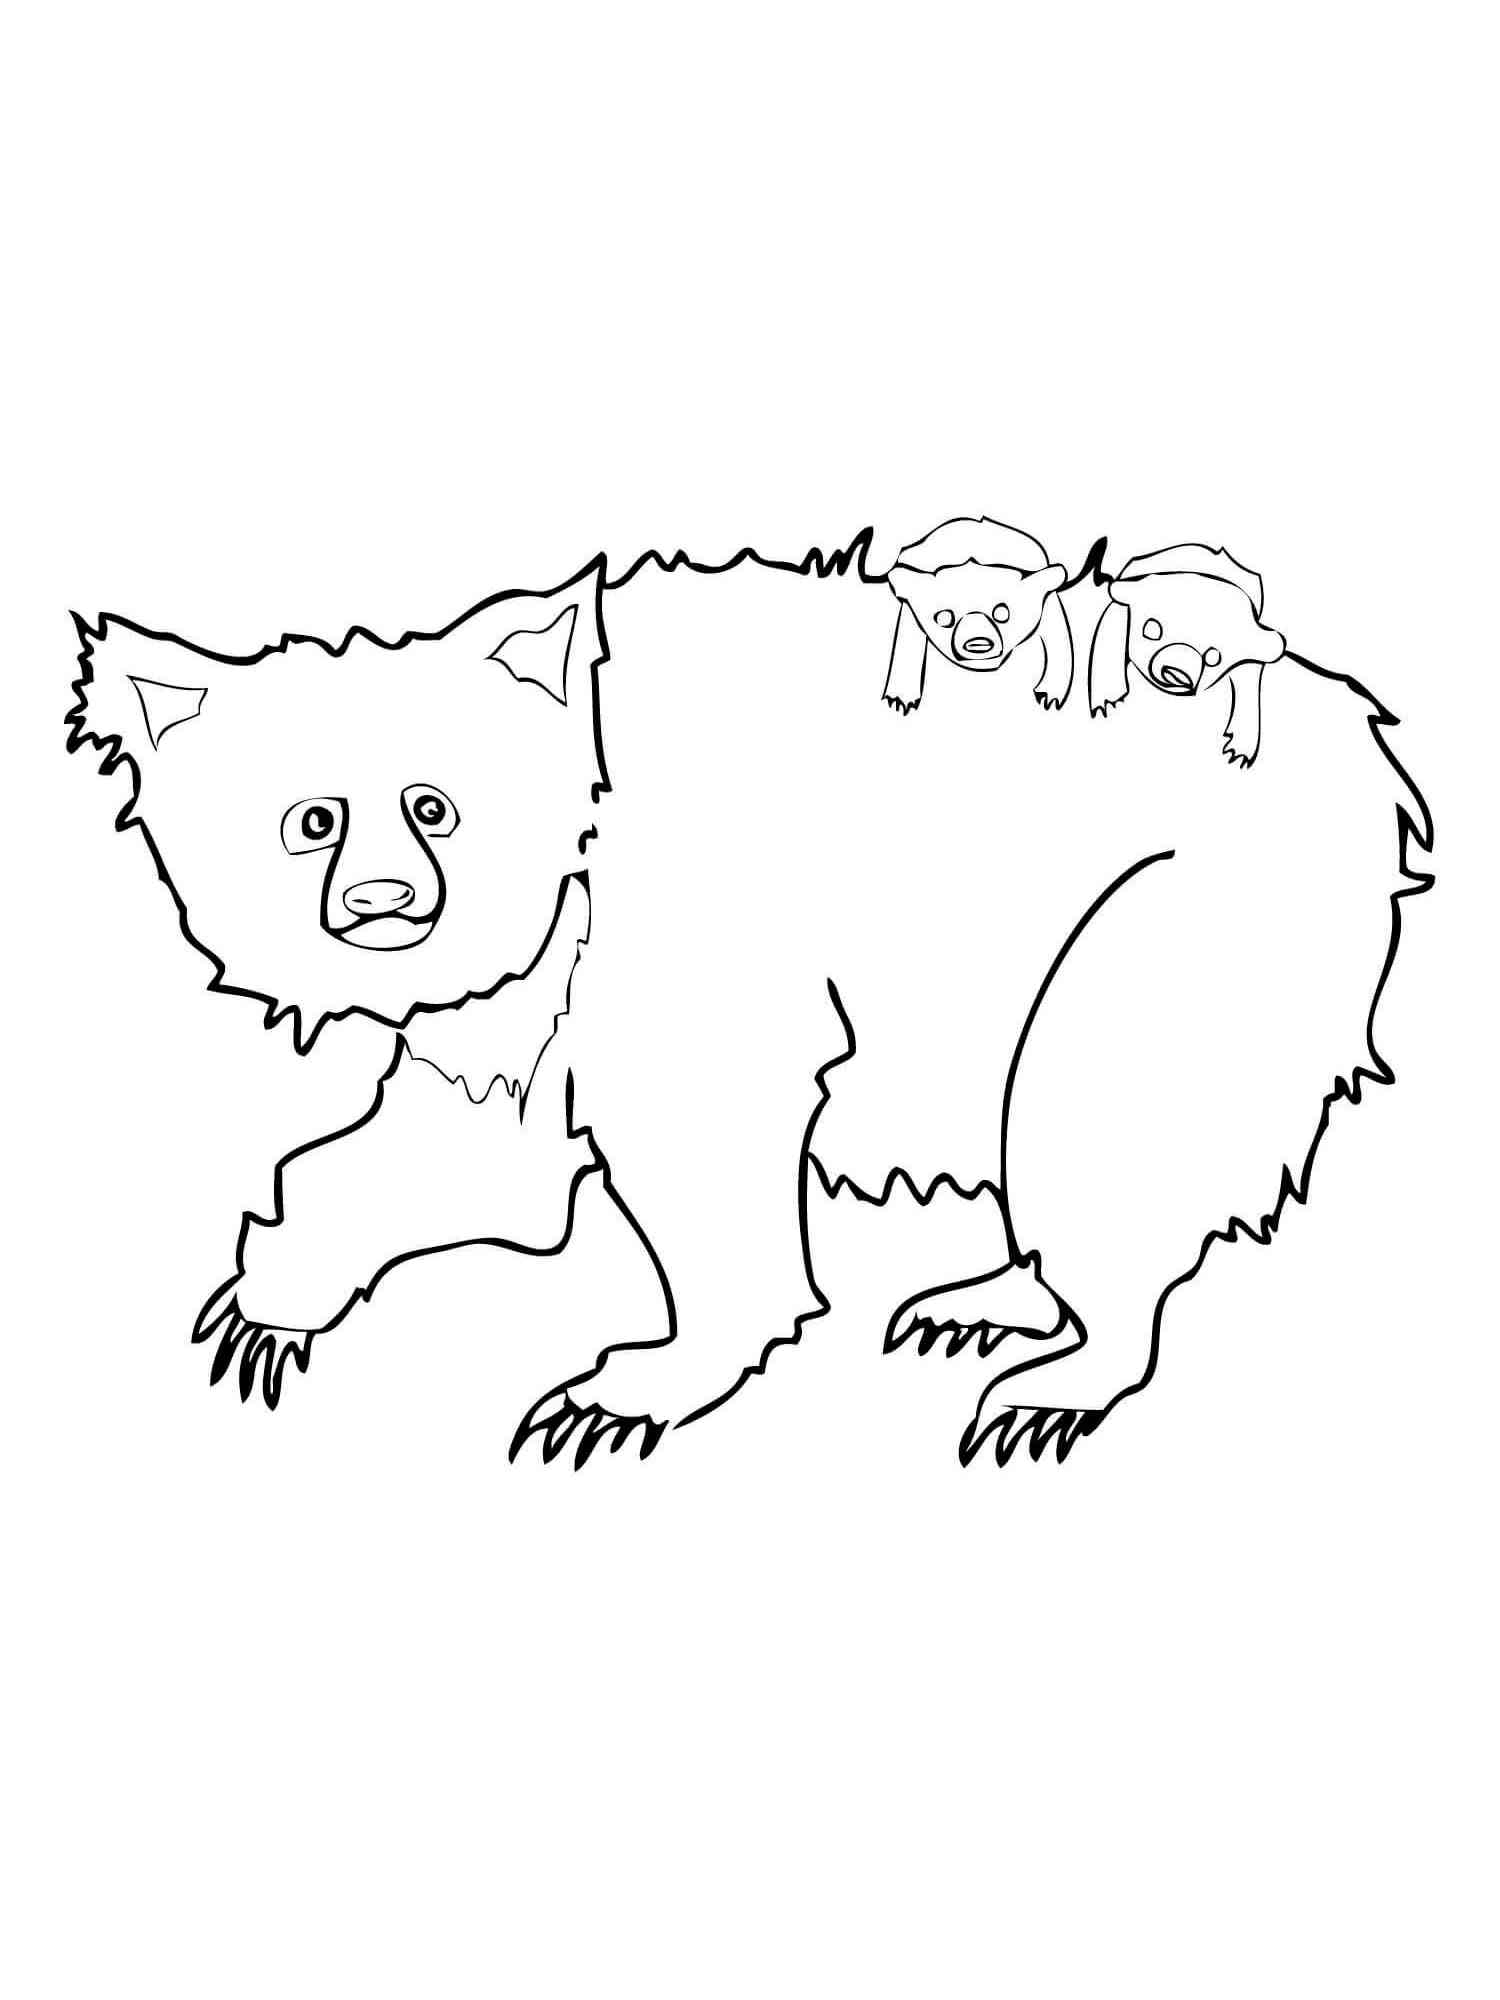 Sloth Bear and Cubs coloring page